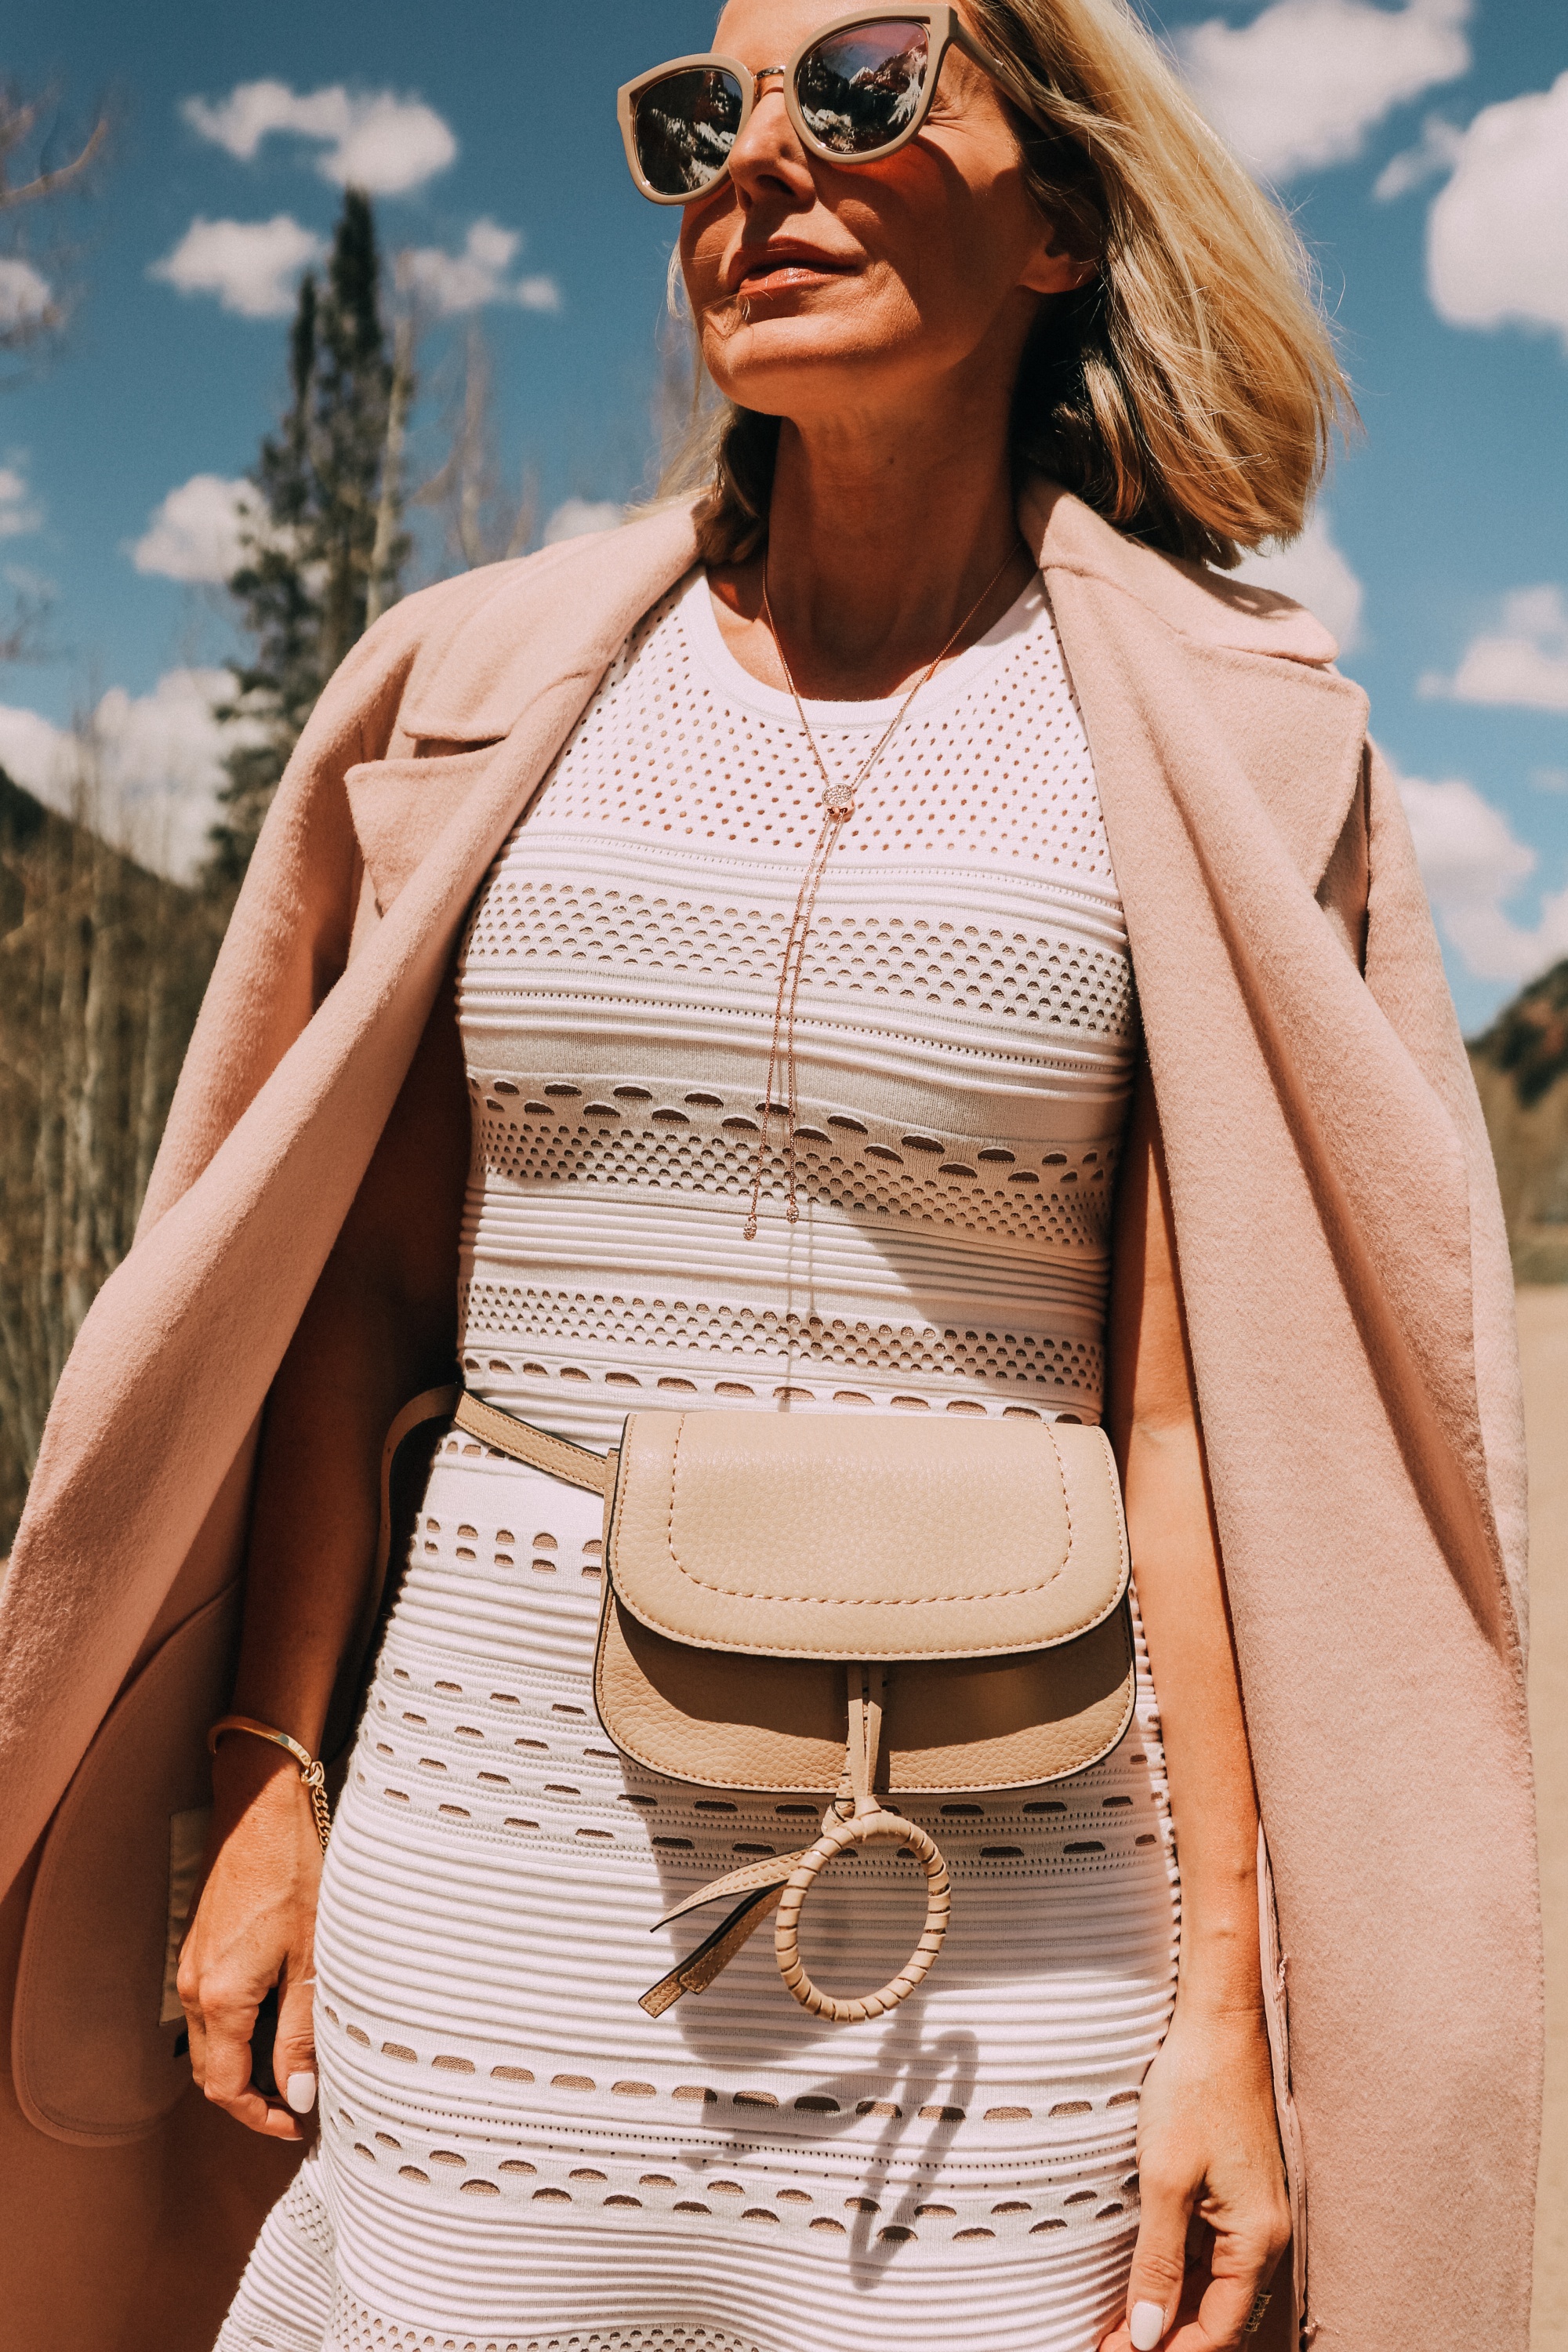 Neutral Accessories, Fashion blogger Erin Busbee of BusbeeStyle.com featuring a beige belt bag, neutral platform sandals, and a lariat necklace by Vince Camuto in Telluride, CO